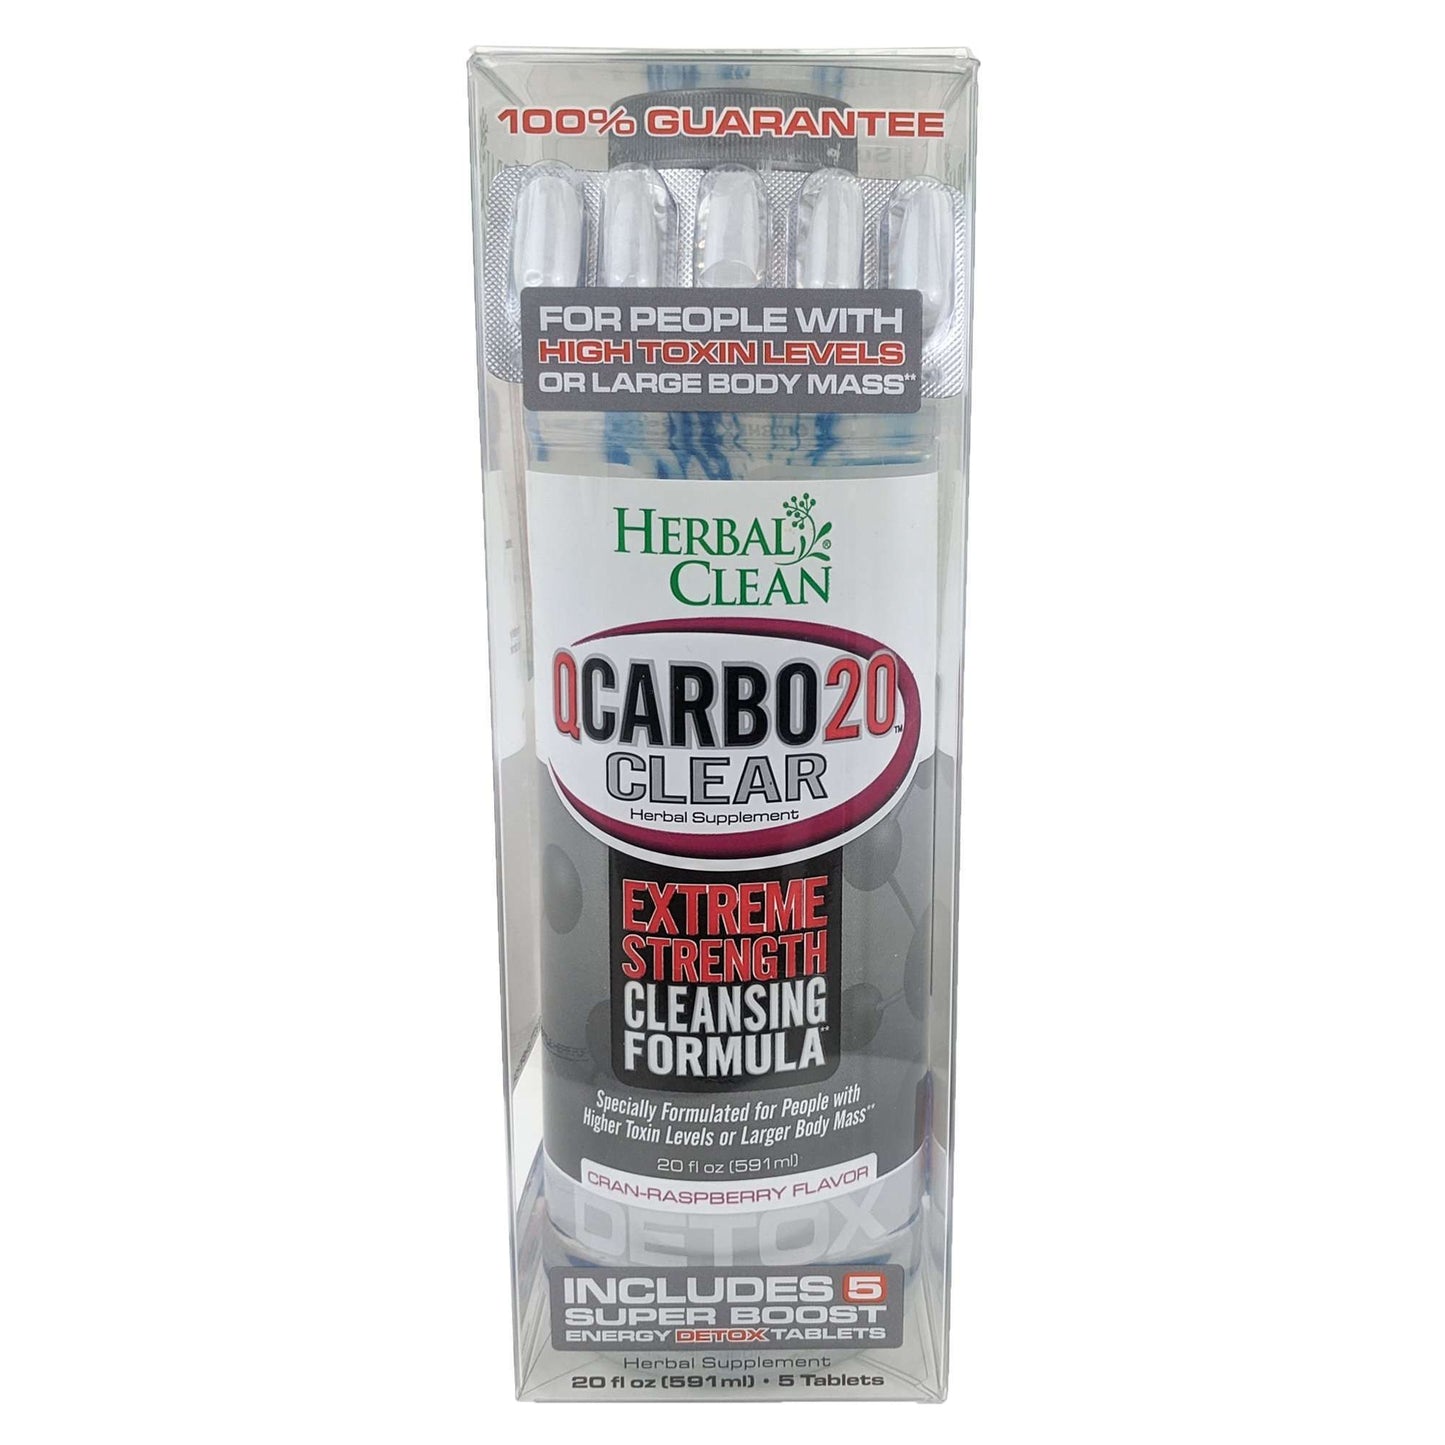 Herbal Clean Qcarbo20 Clear 20oz with 5 Tablets, Cran-Raspberry